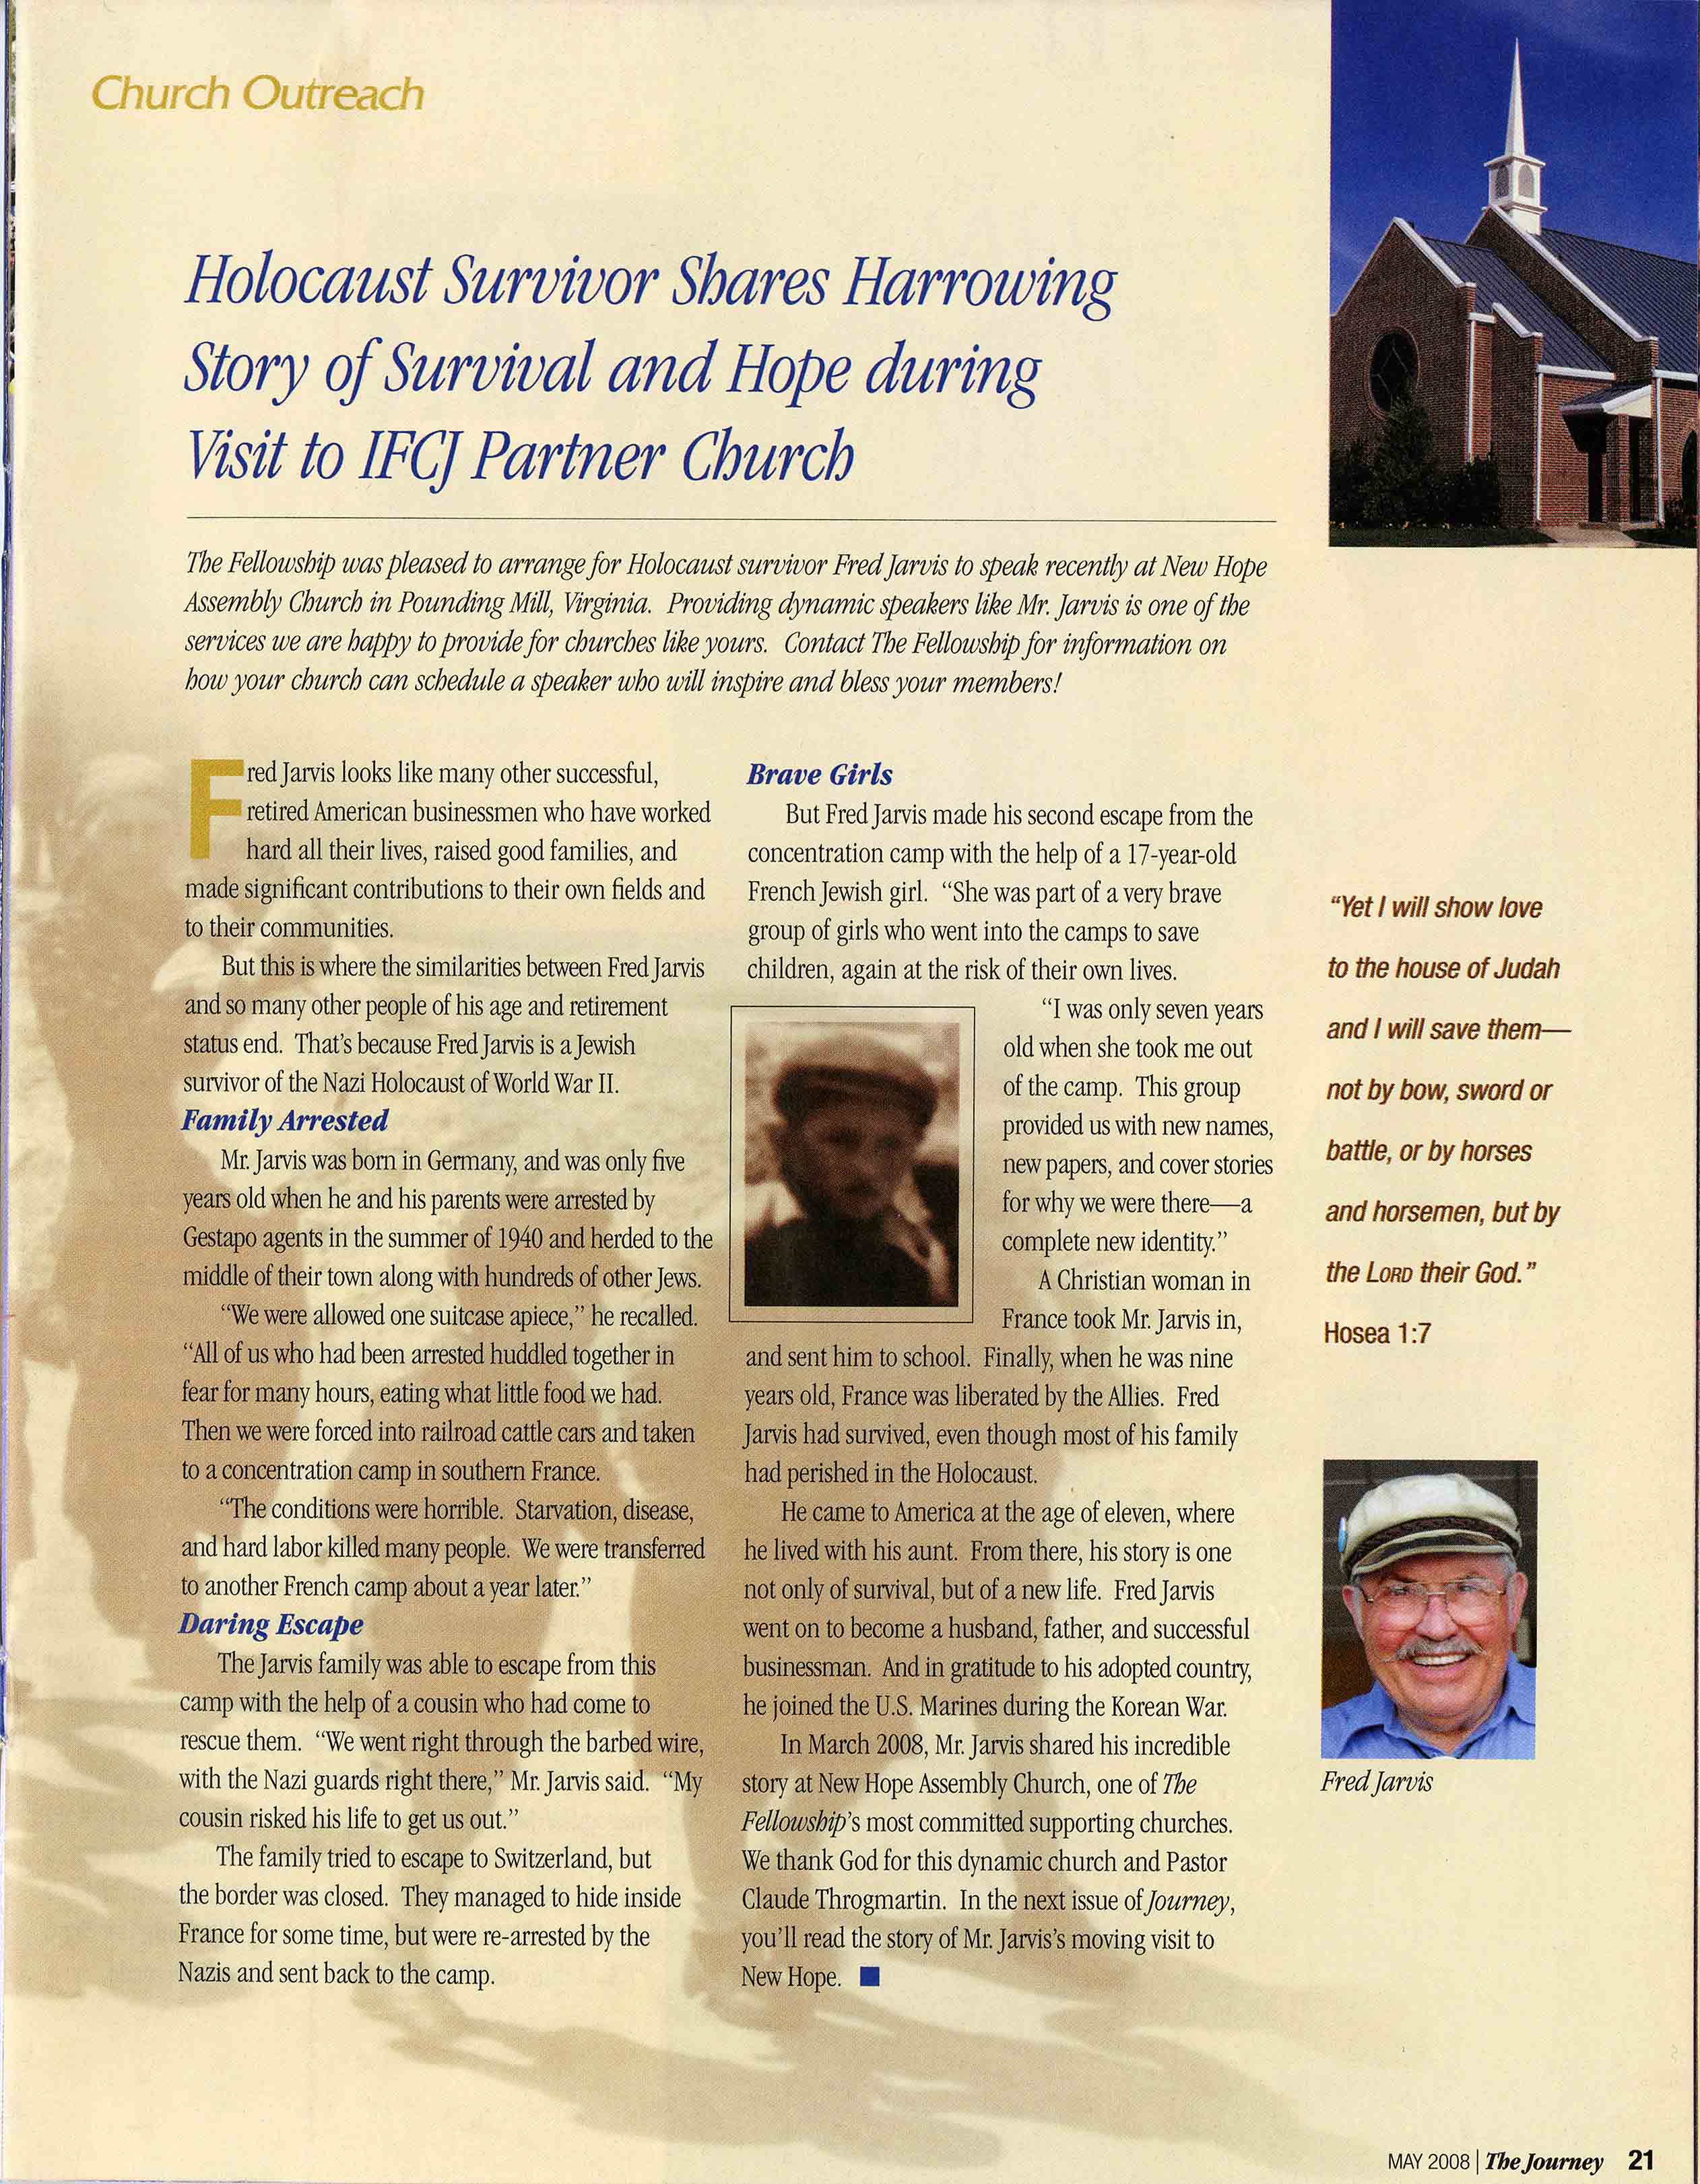 "Holocaust Survivor Shares Harrowing Story of Survival" in The Journey Magazine, from the Irena Urdang de Tour Collection of Holocaust Materials